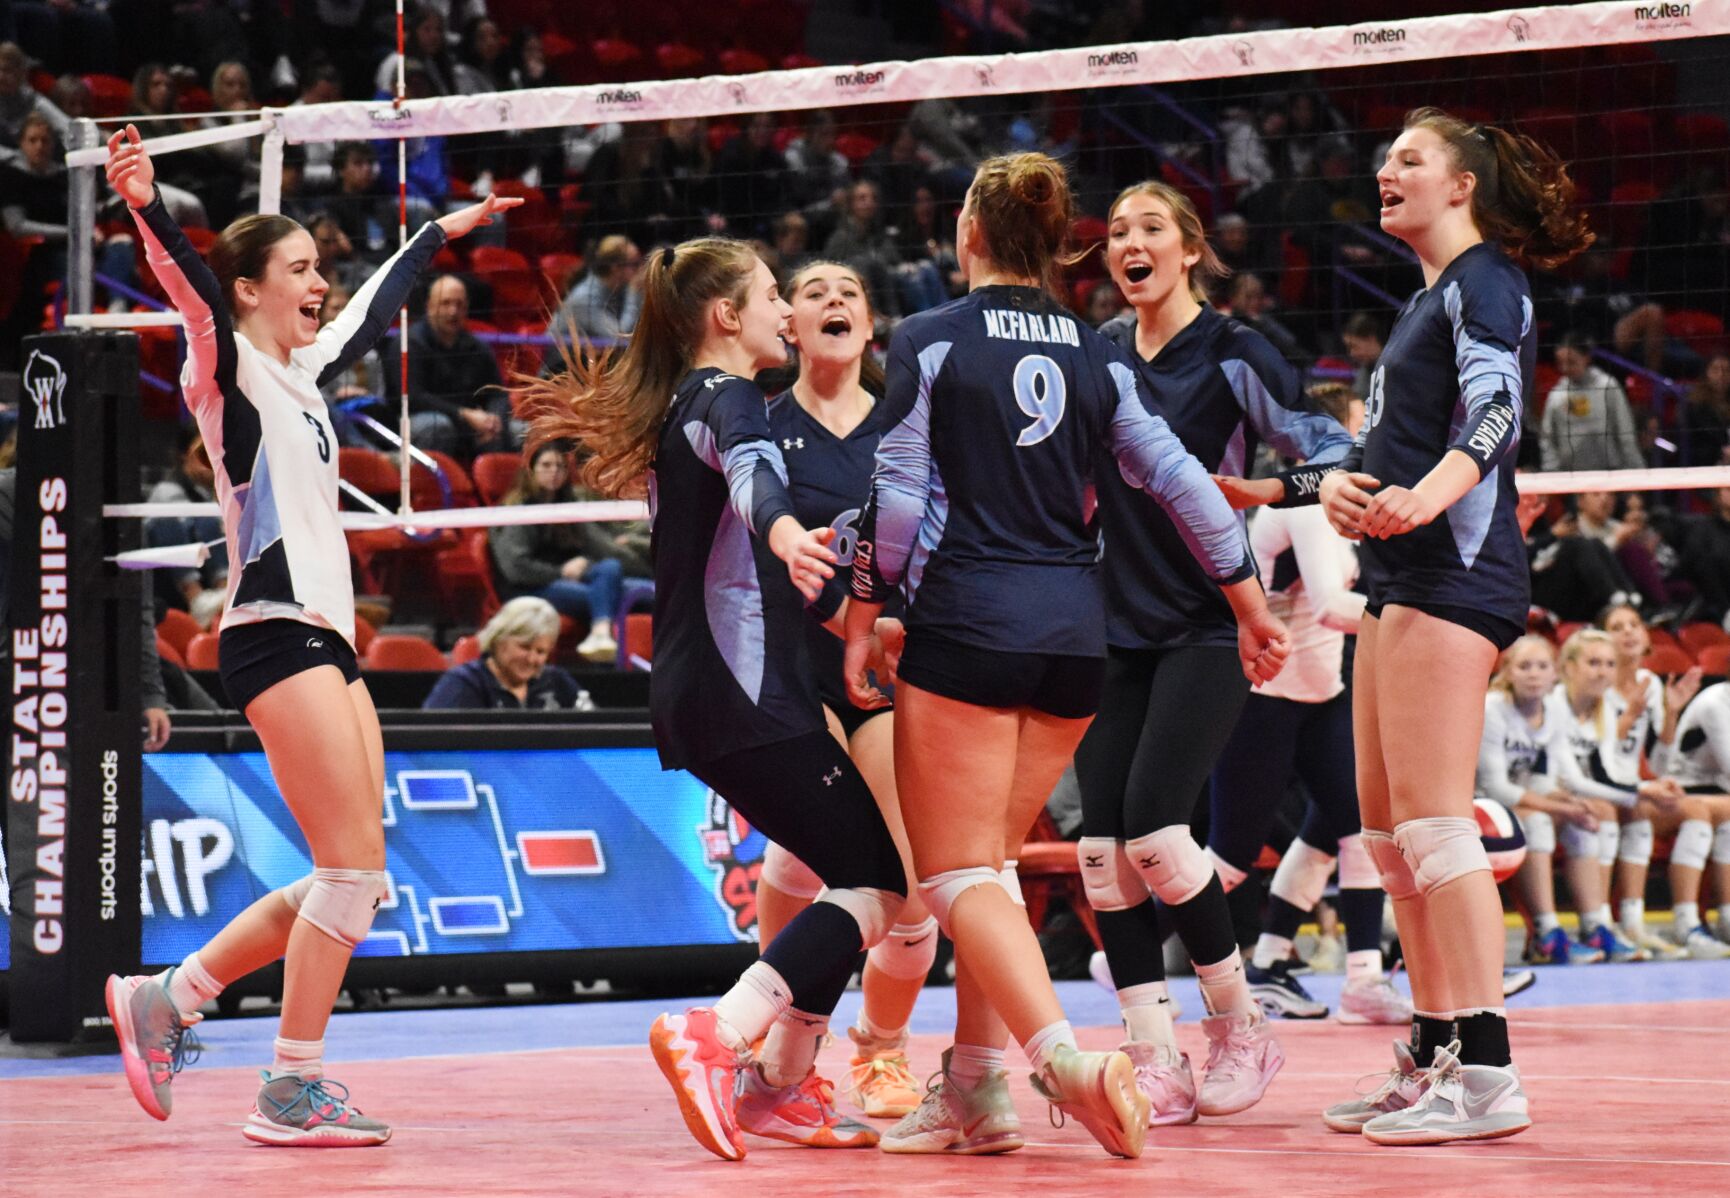 McFarland volleyball takes home silver ball at state tournament